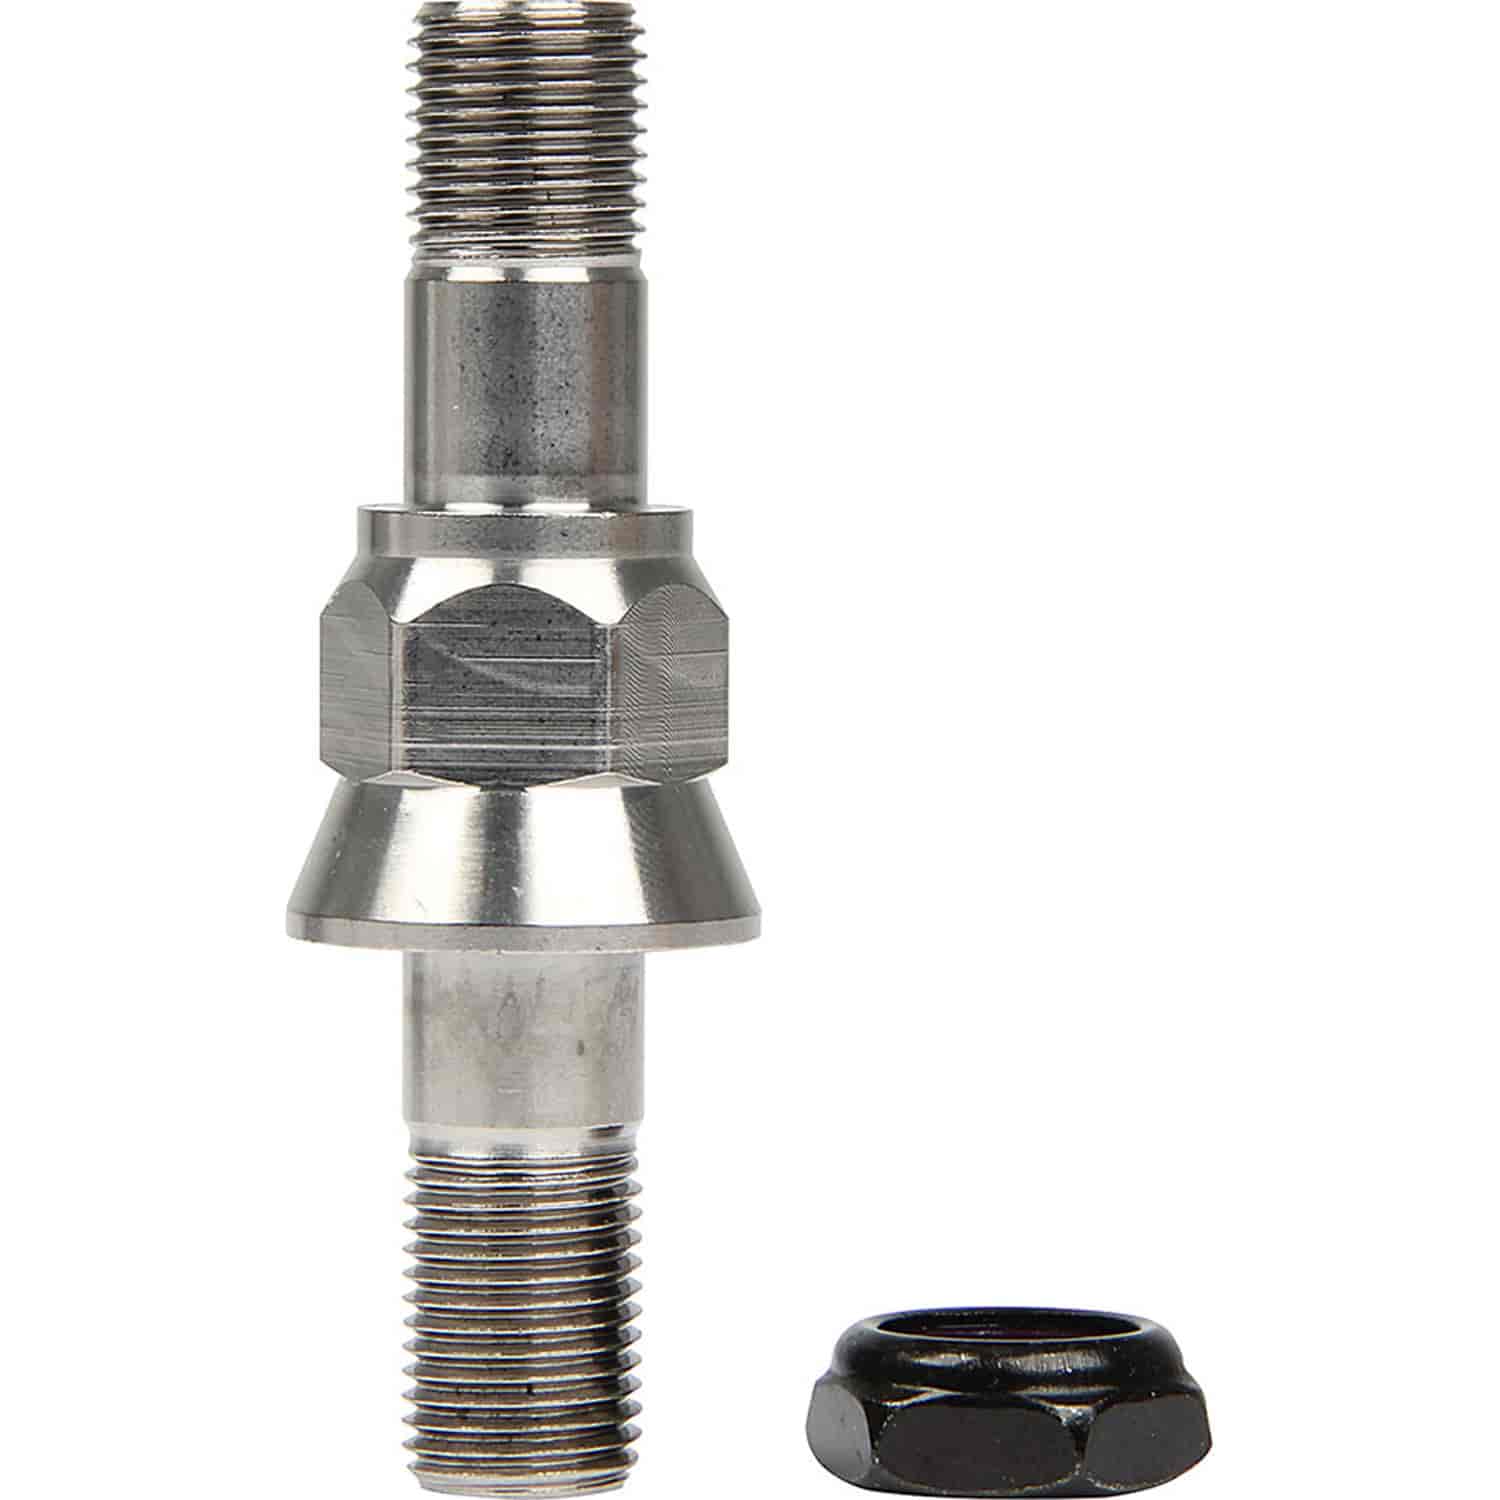 Sprint Car Titanium Shock Stud Kit For Rear Torsion Arm With Large Taper Cone